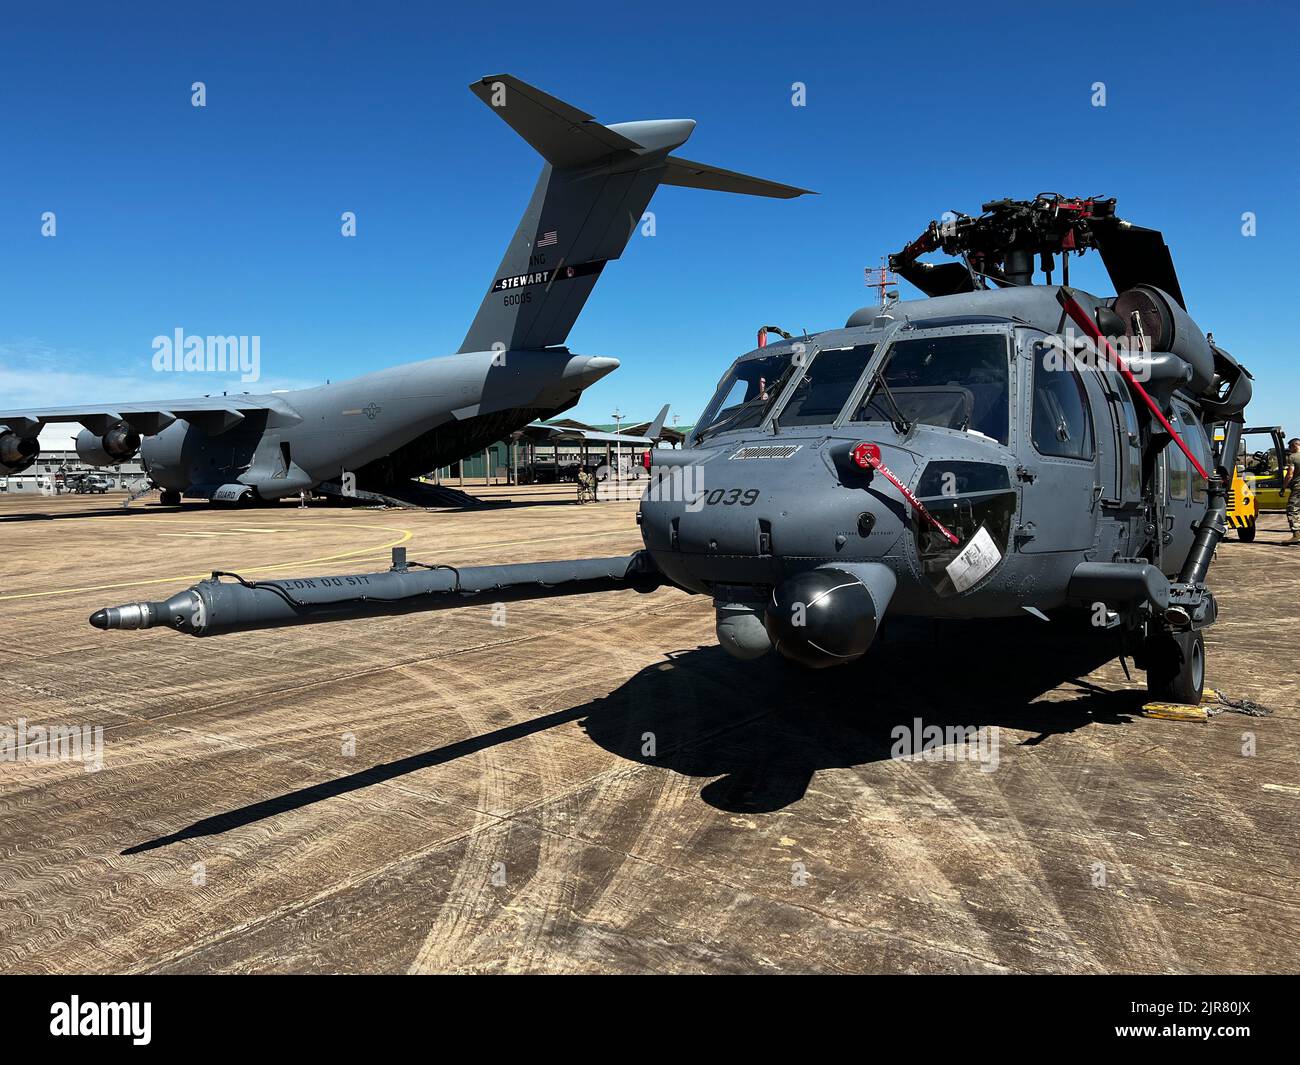 https://c8.alamy.com/comp/2JR80JX/airmen-assigned-to-the-new-york-air-national-guards-106th-rescue-work-with-members-of-the-new-york-air-national-guards-105th-airlift-wing-to-offload-106th-hh-60-pave-hawk-search-and-rescue-helicopters-from-105th-c-17s-at-a-brazilian-air-force-base-in-campo-grande-brazil-on-august-20-2022-the-airmen-were-in-brazil-to-participate-in-exercise-tapio-a-combined-brazilian-us-irregular-warfare-exercise-in-campo-grade-brazil-the-new-york-air-national-guard-dispatched-100-airmen-from-the-two-wings-to-participate-as-part-of-the-state-partnership-program-relationship-with-brazil-us-air-nat-2JR80JX.jpg